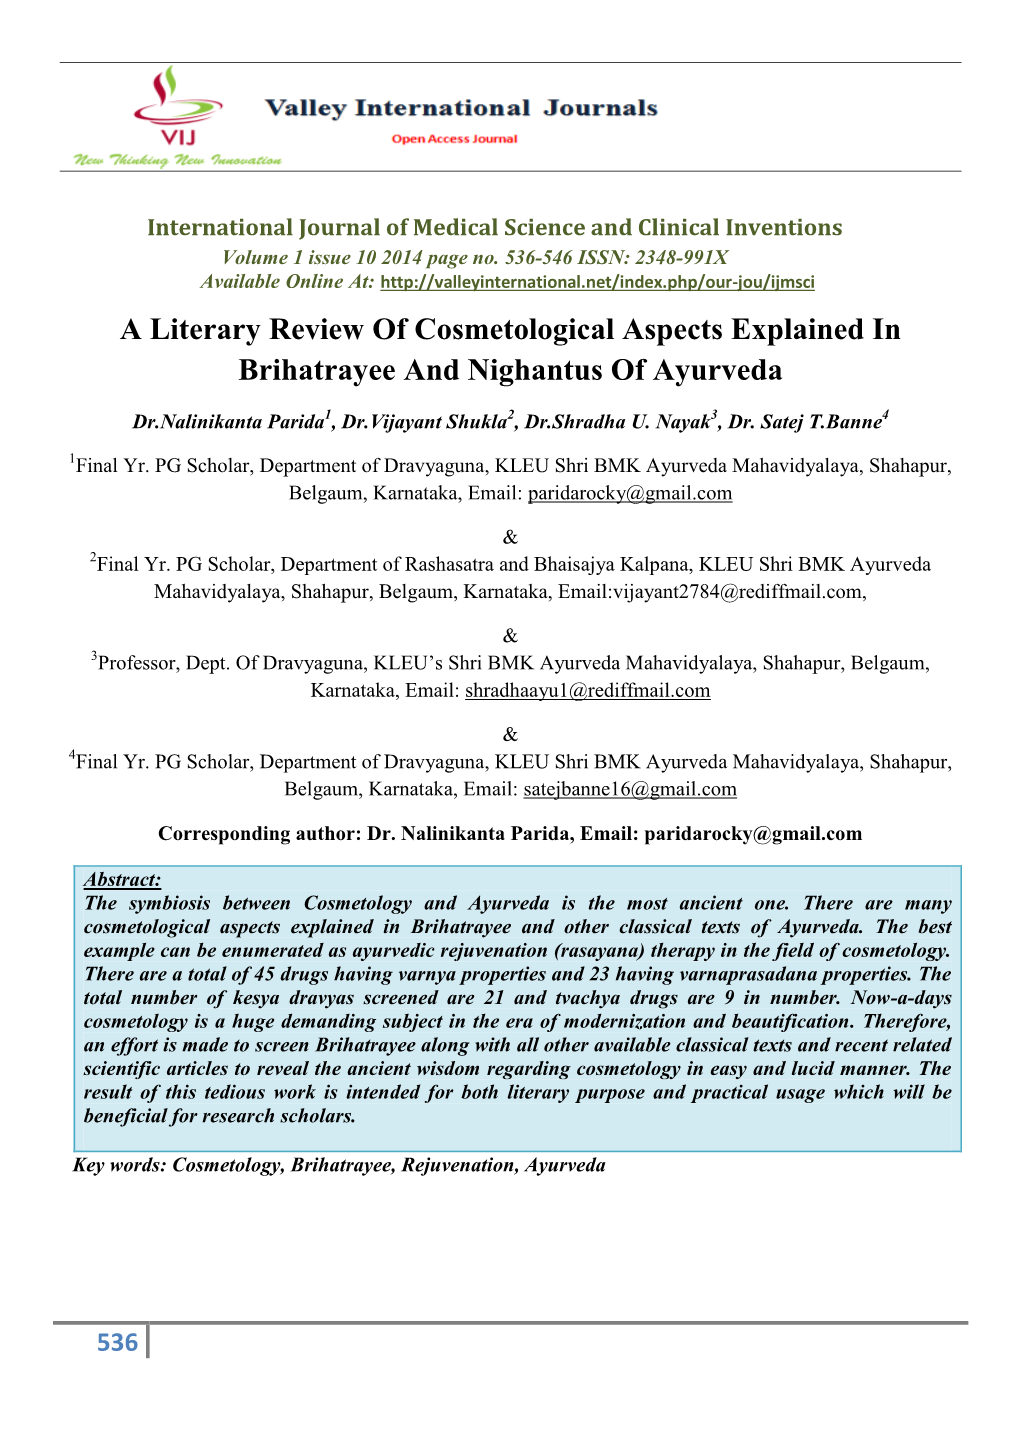 A Literary Review of Cosmetological Aspects Explained in Brihatrayee and Nighantus of Ayurveda